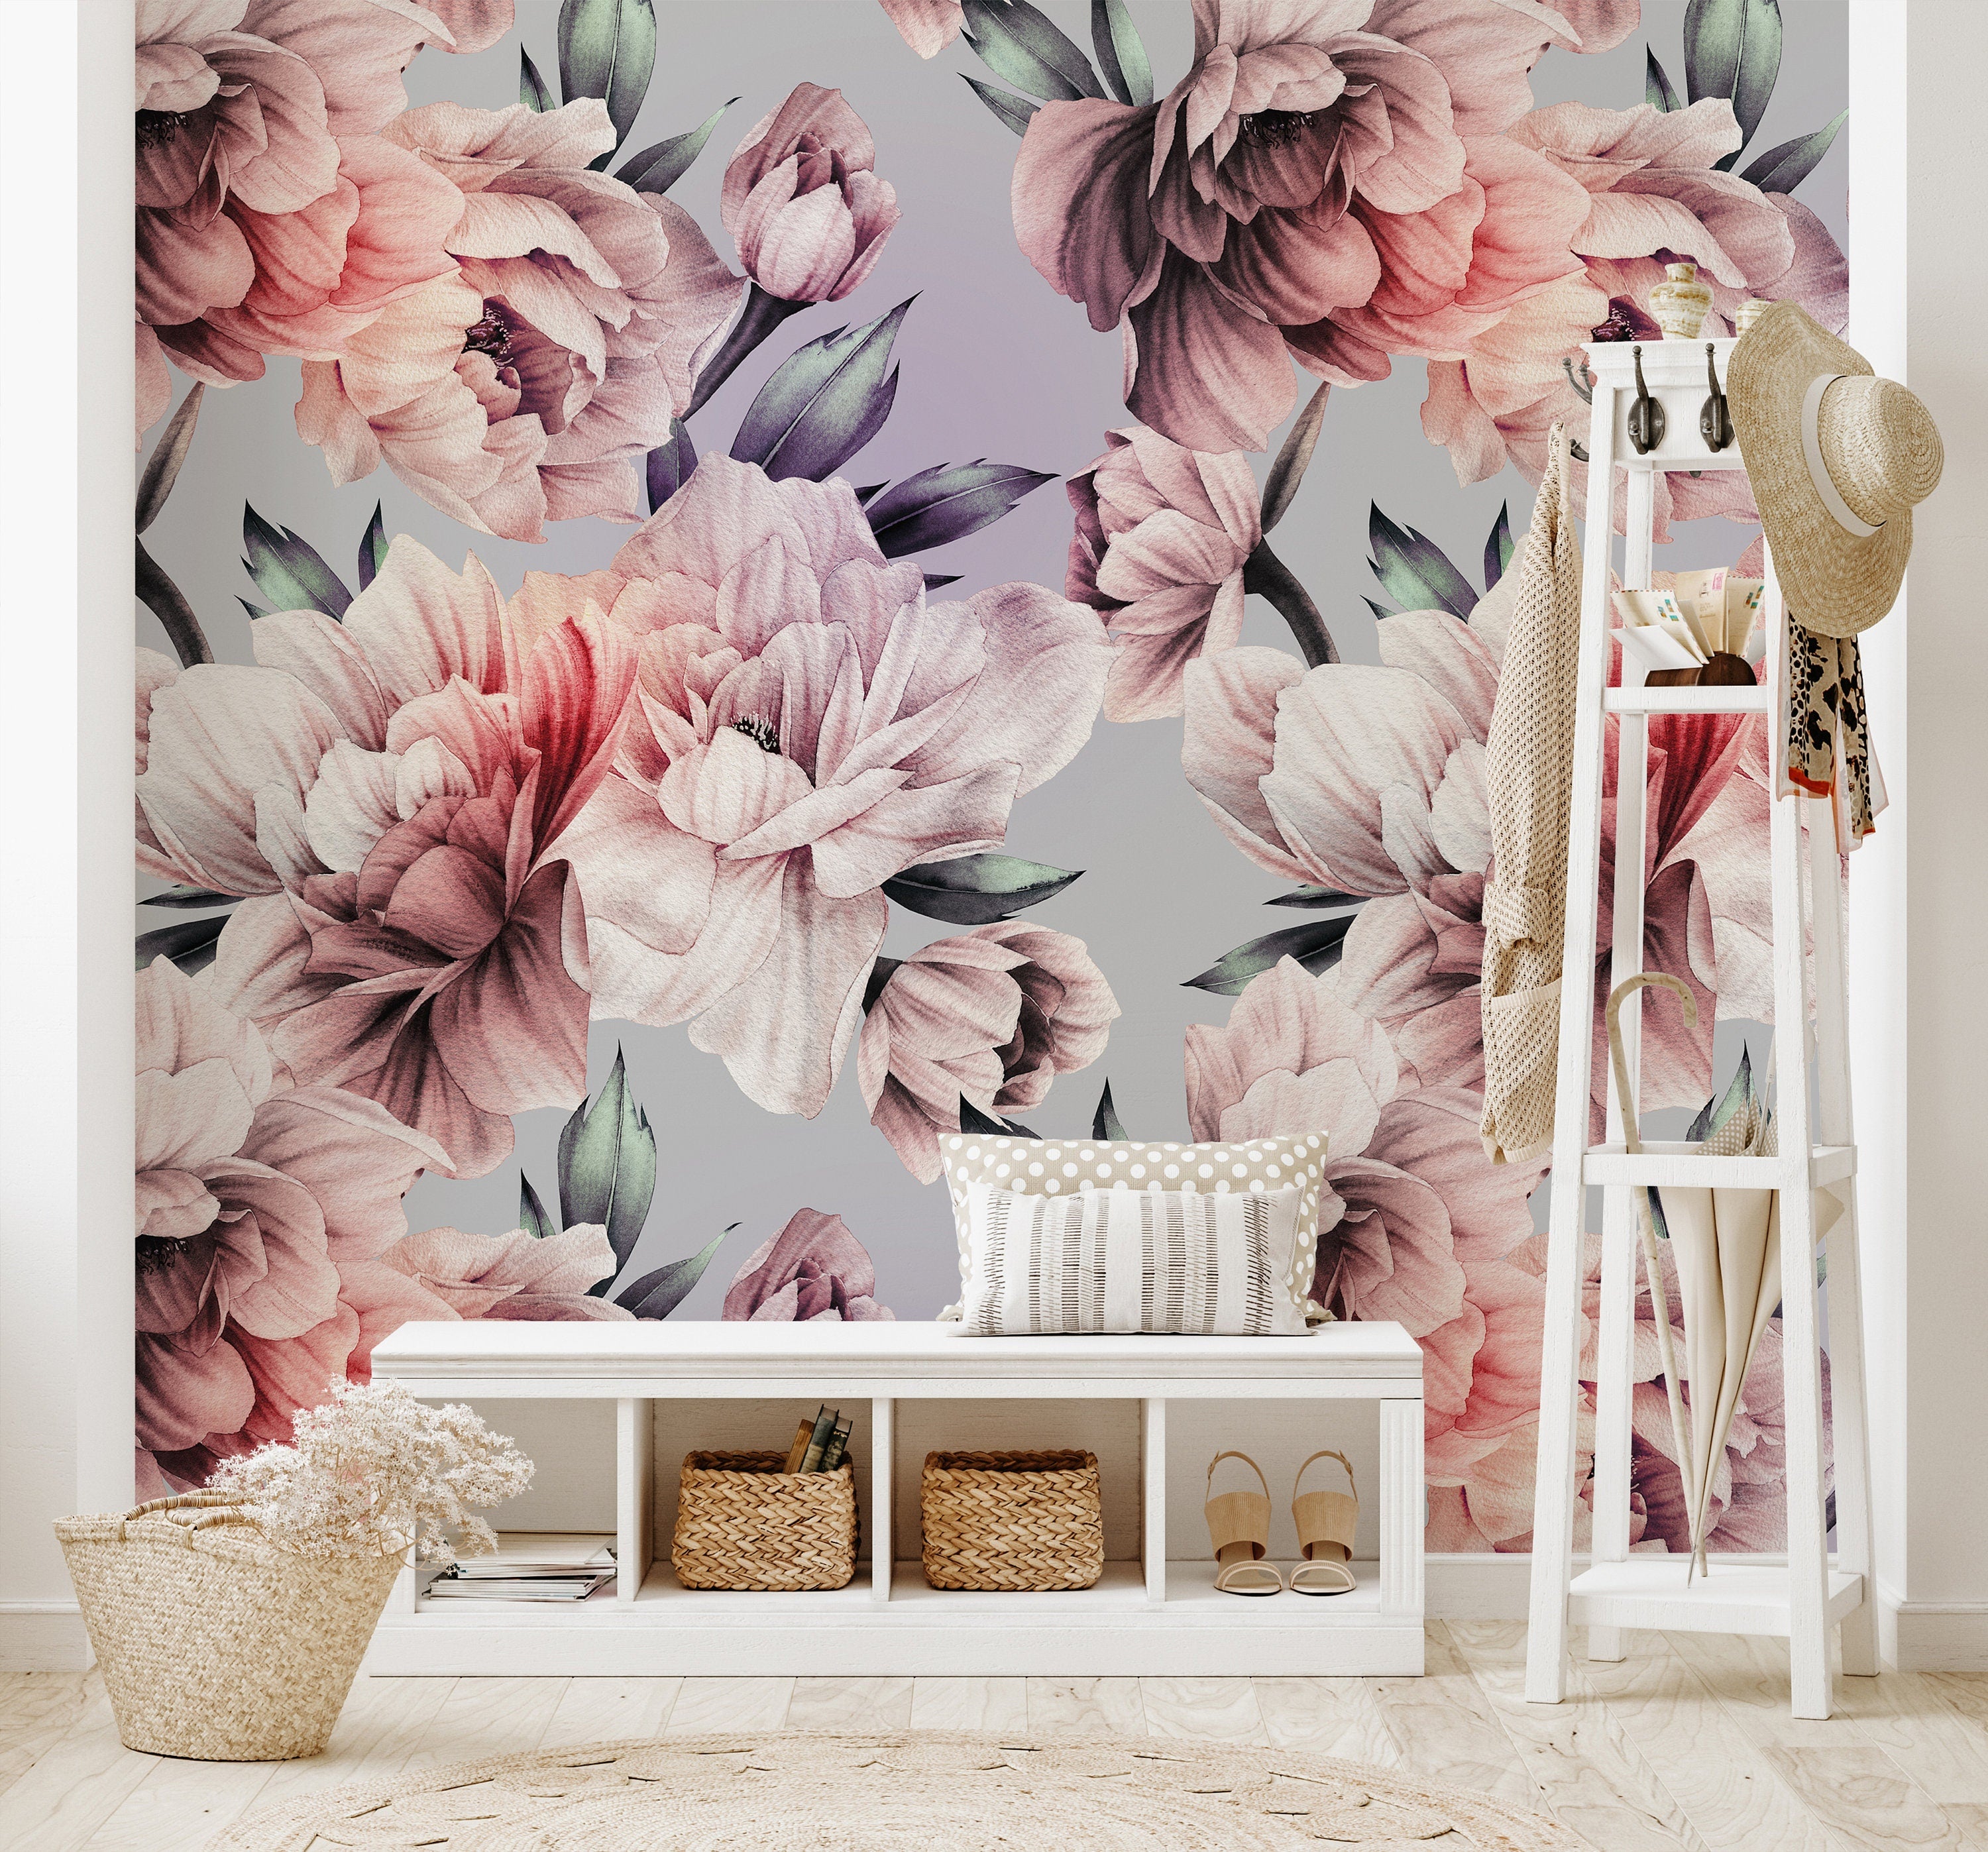 Large Floral Mural Wallpaper | Removable Wallpaper | Peel And Stick Wallpaper | Adhesive Wallpaper | Wall Paper Peel Stick Wall Mural 3669 - JamesAndColors